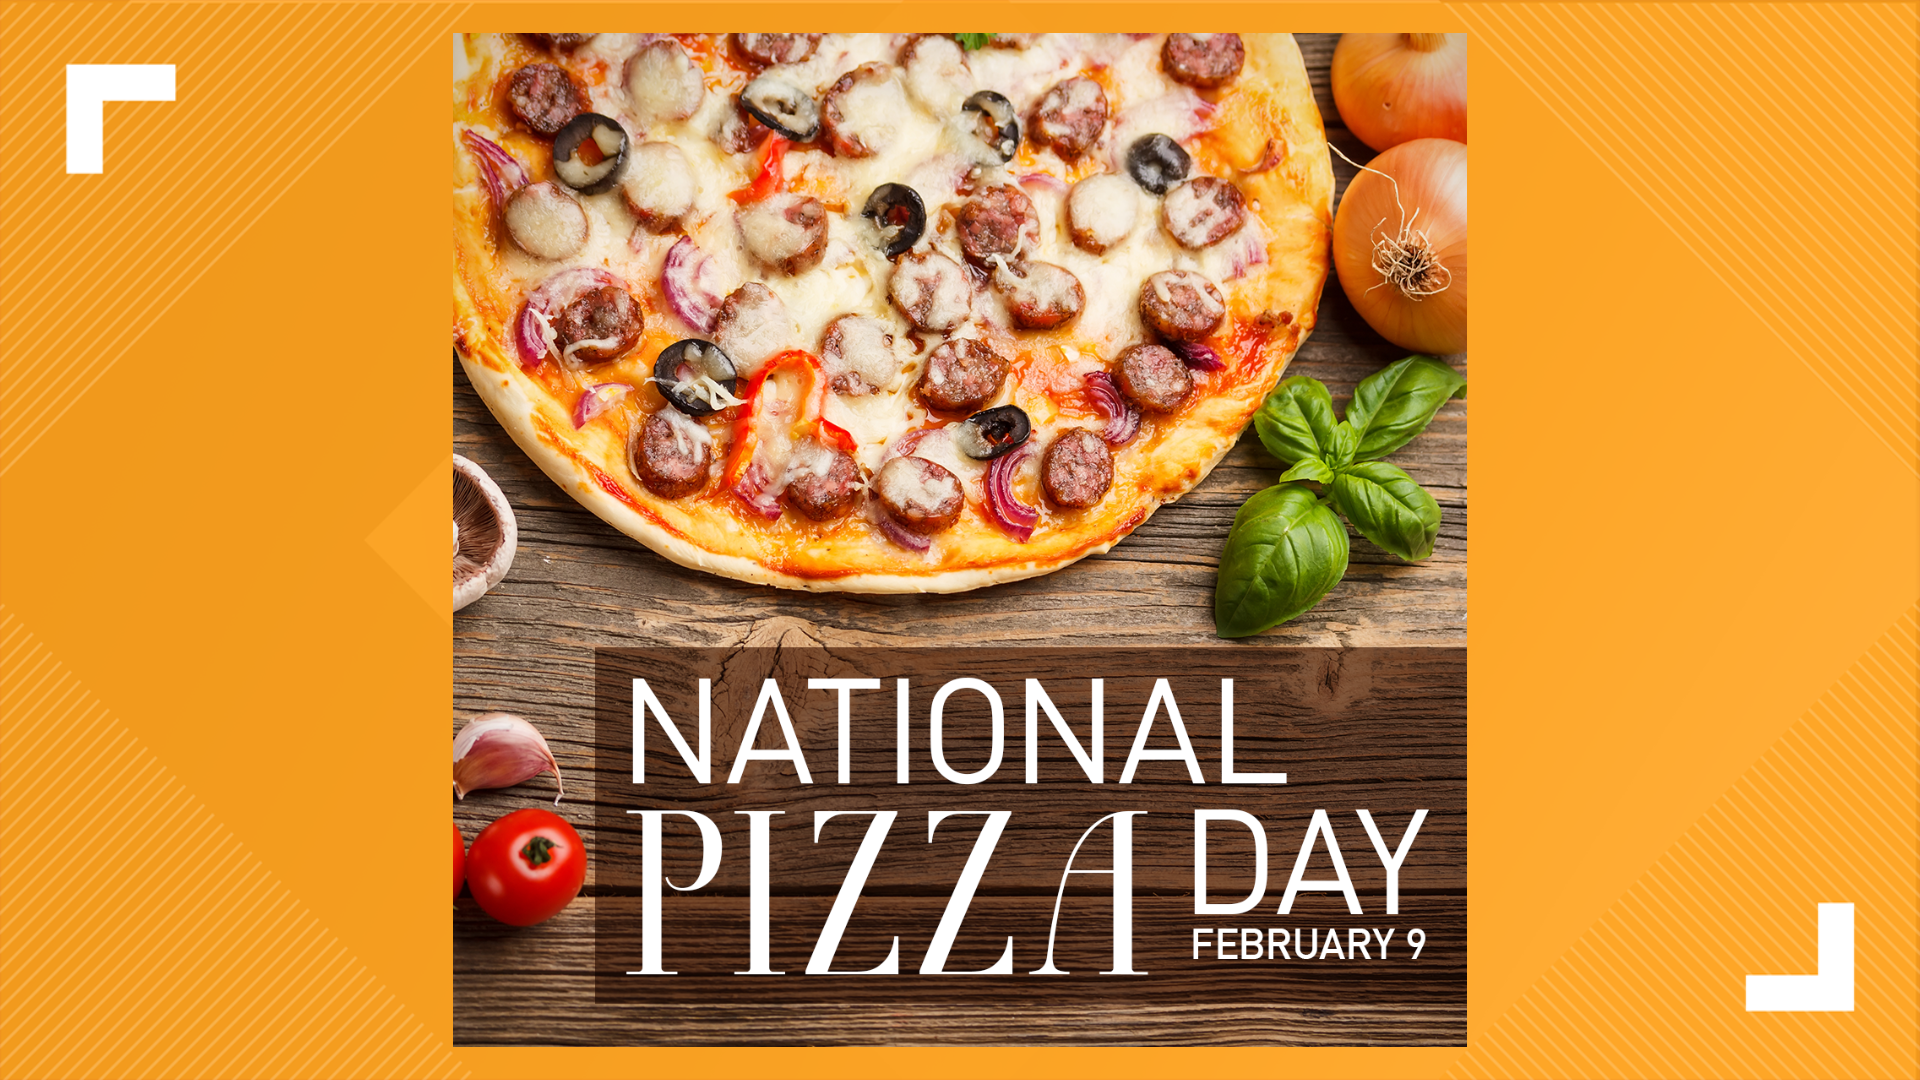 Feb. 9 is National Pizza Day, so if you're looking for just the right place to celebrate, look no further.